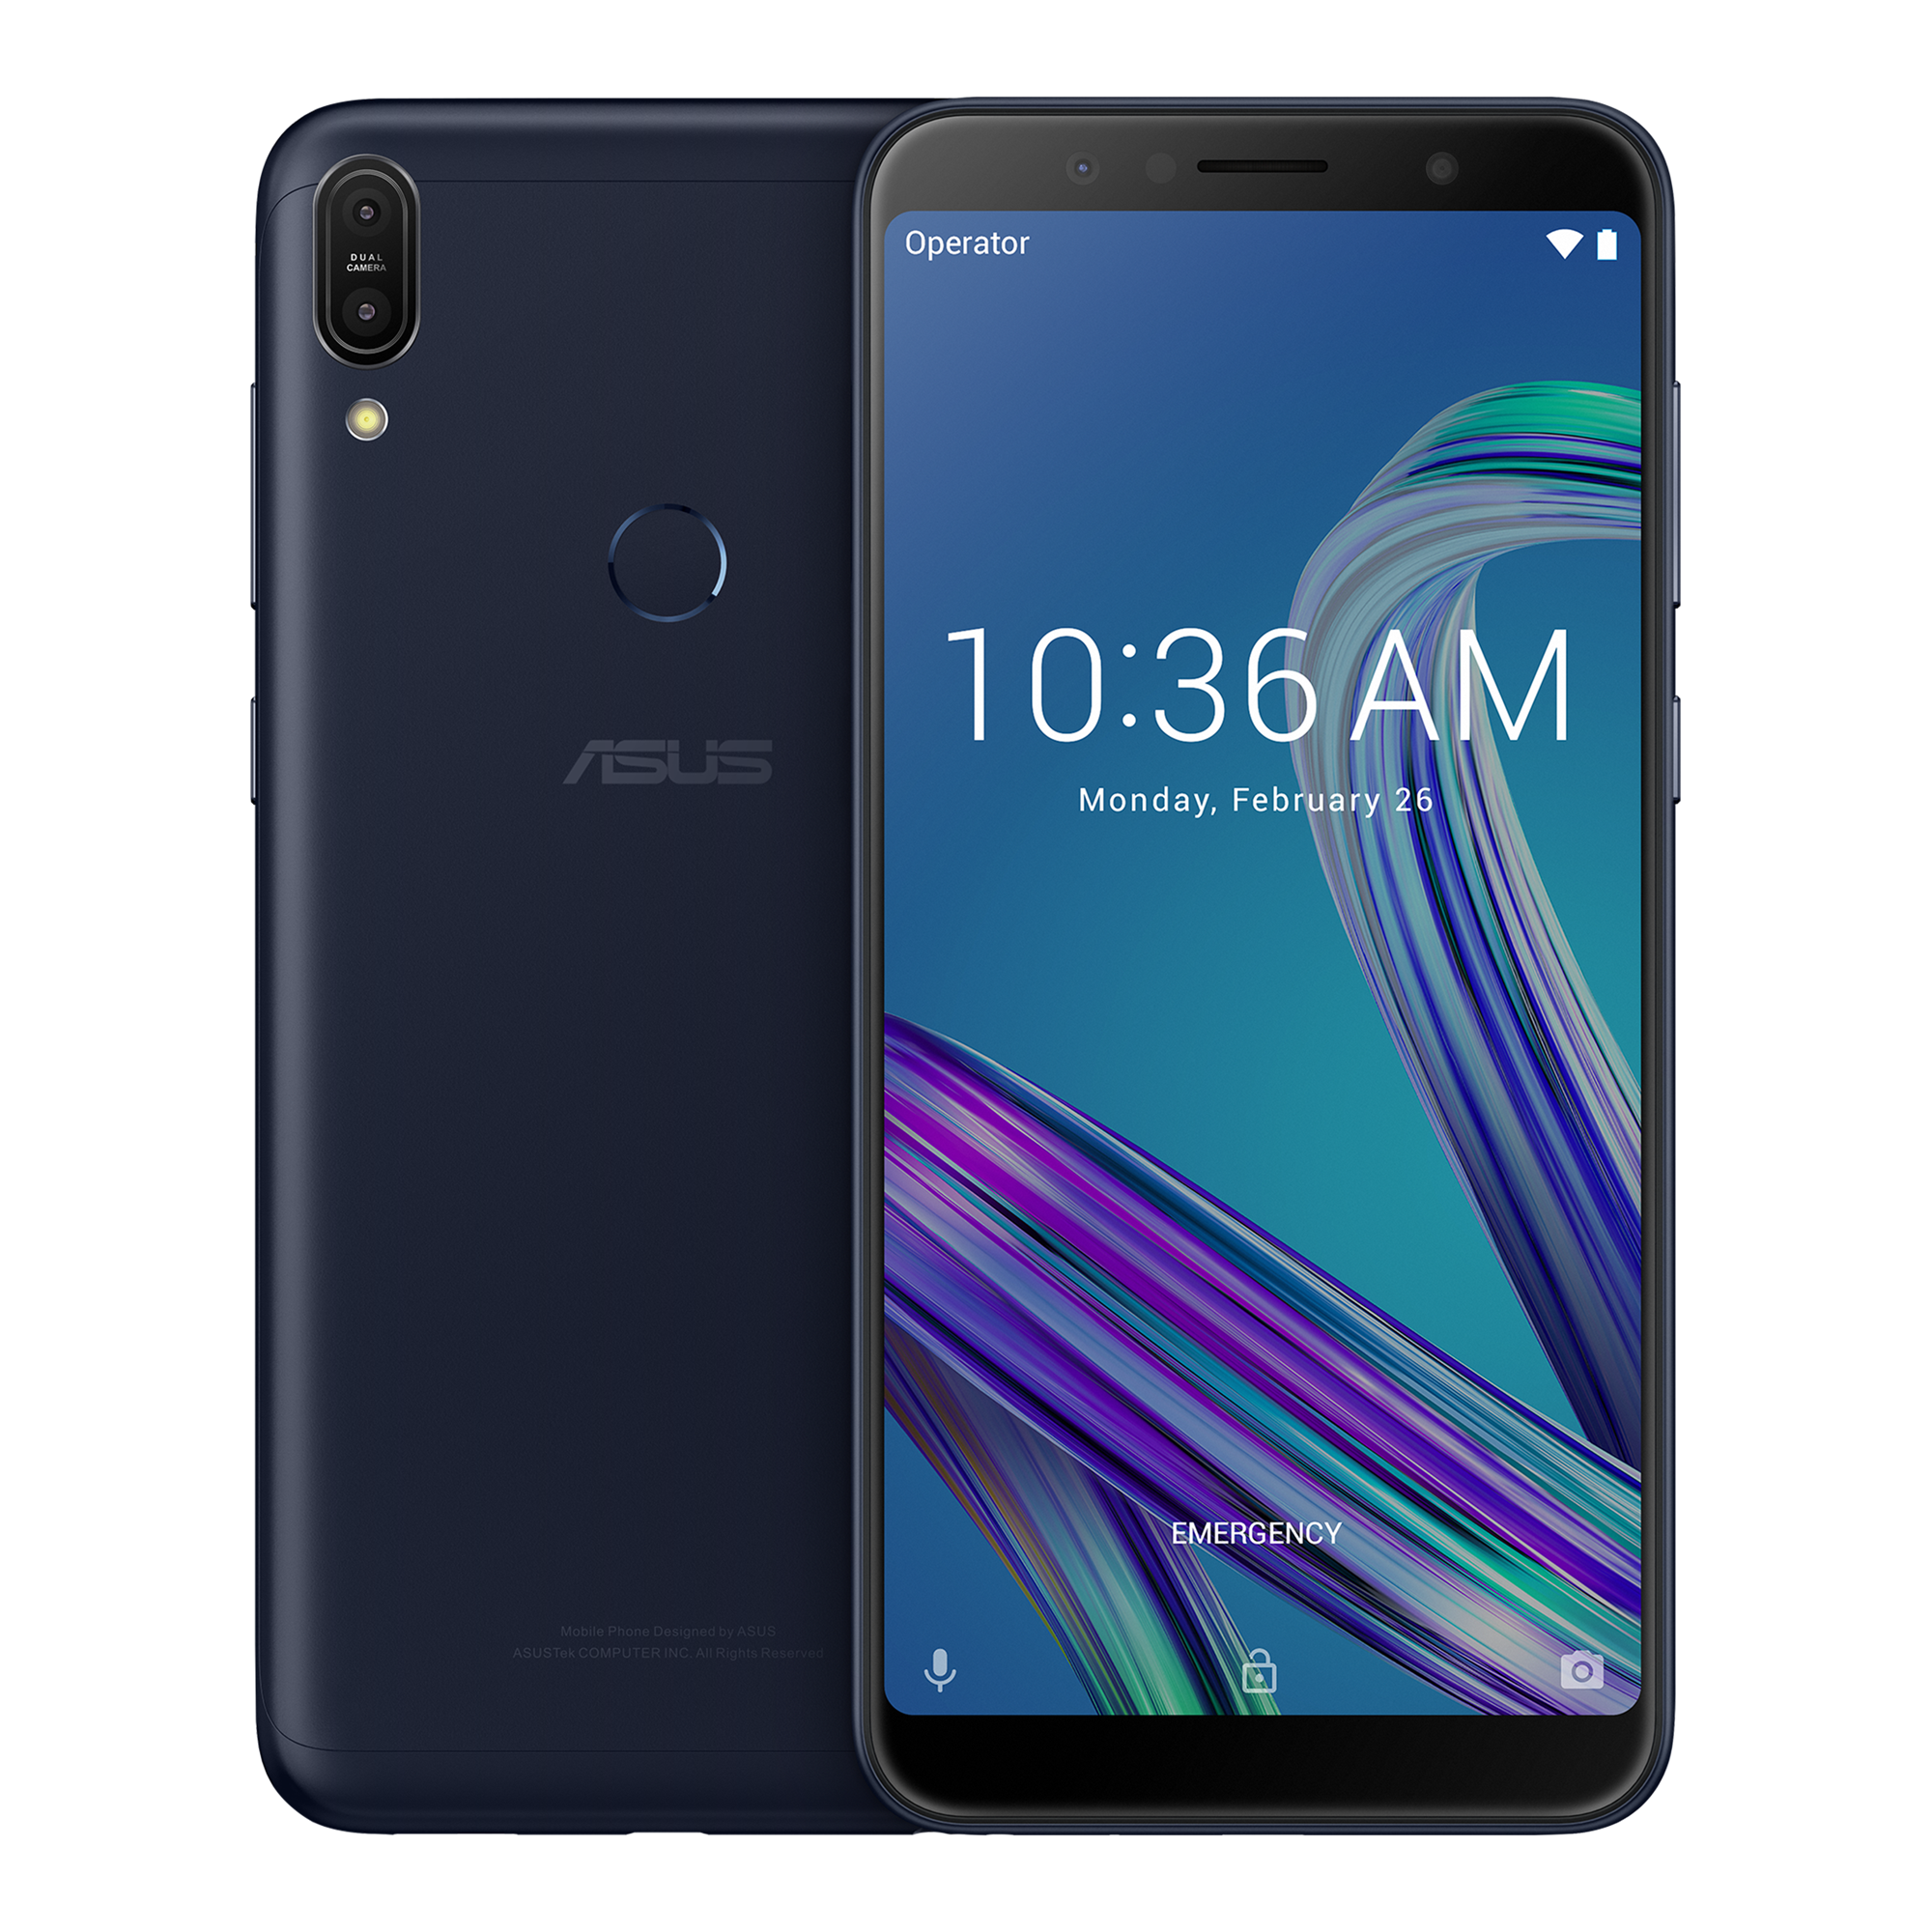 ZenFone Max Pro (ZB602KL)｜智慧手機｜ASUS 台灣